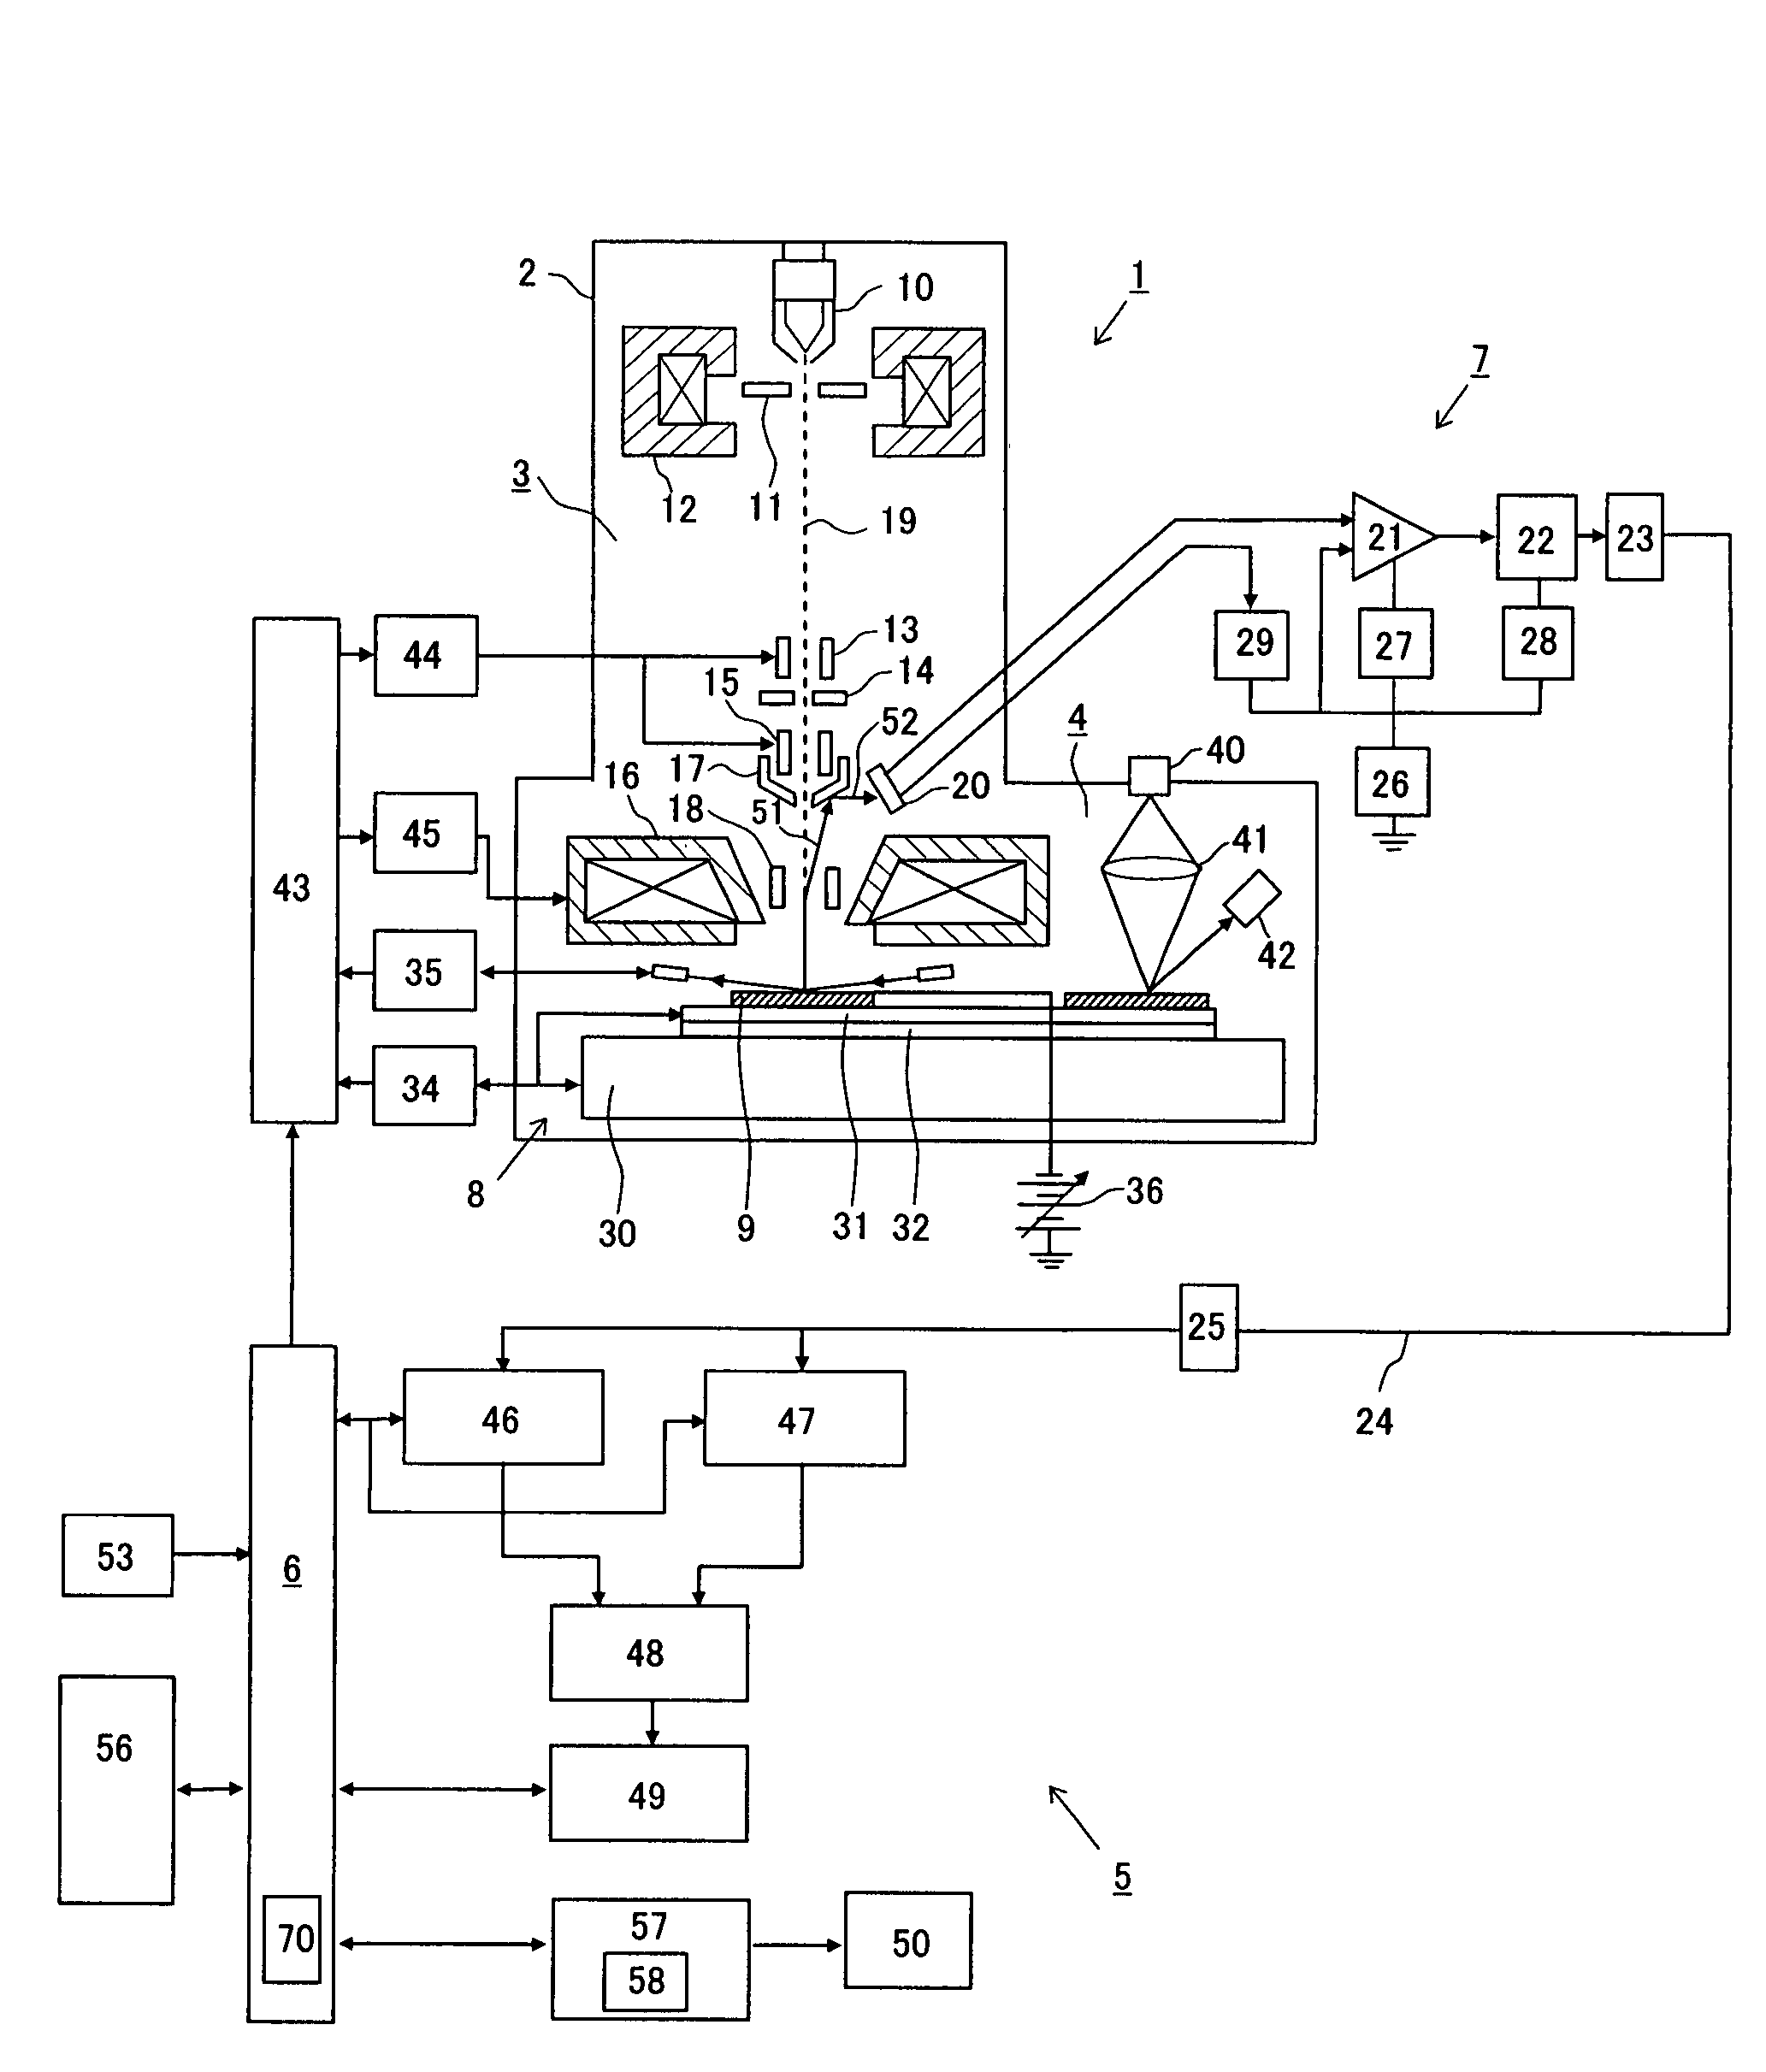 Circuit-pattern inspecting apparatus and method